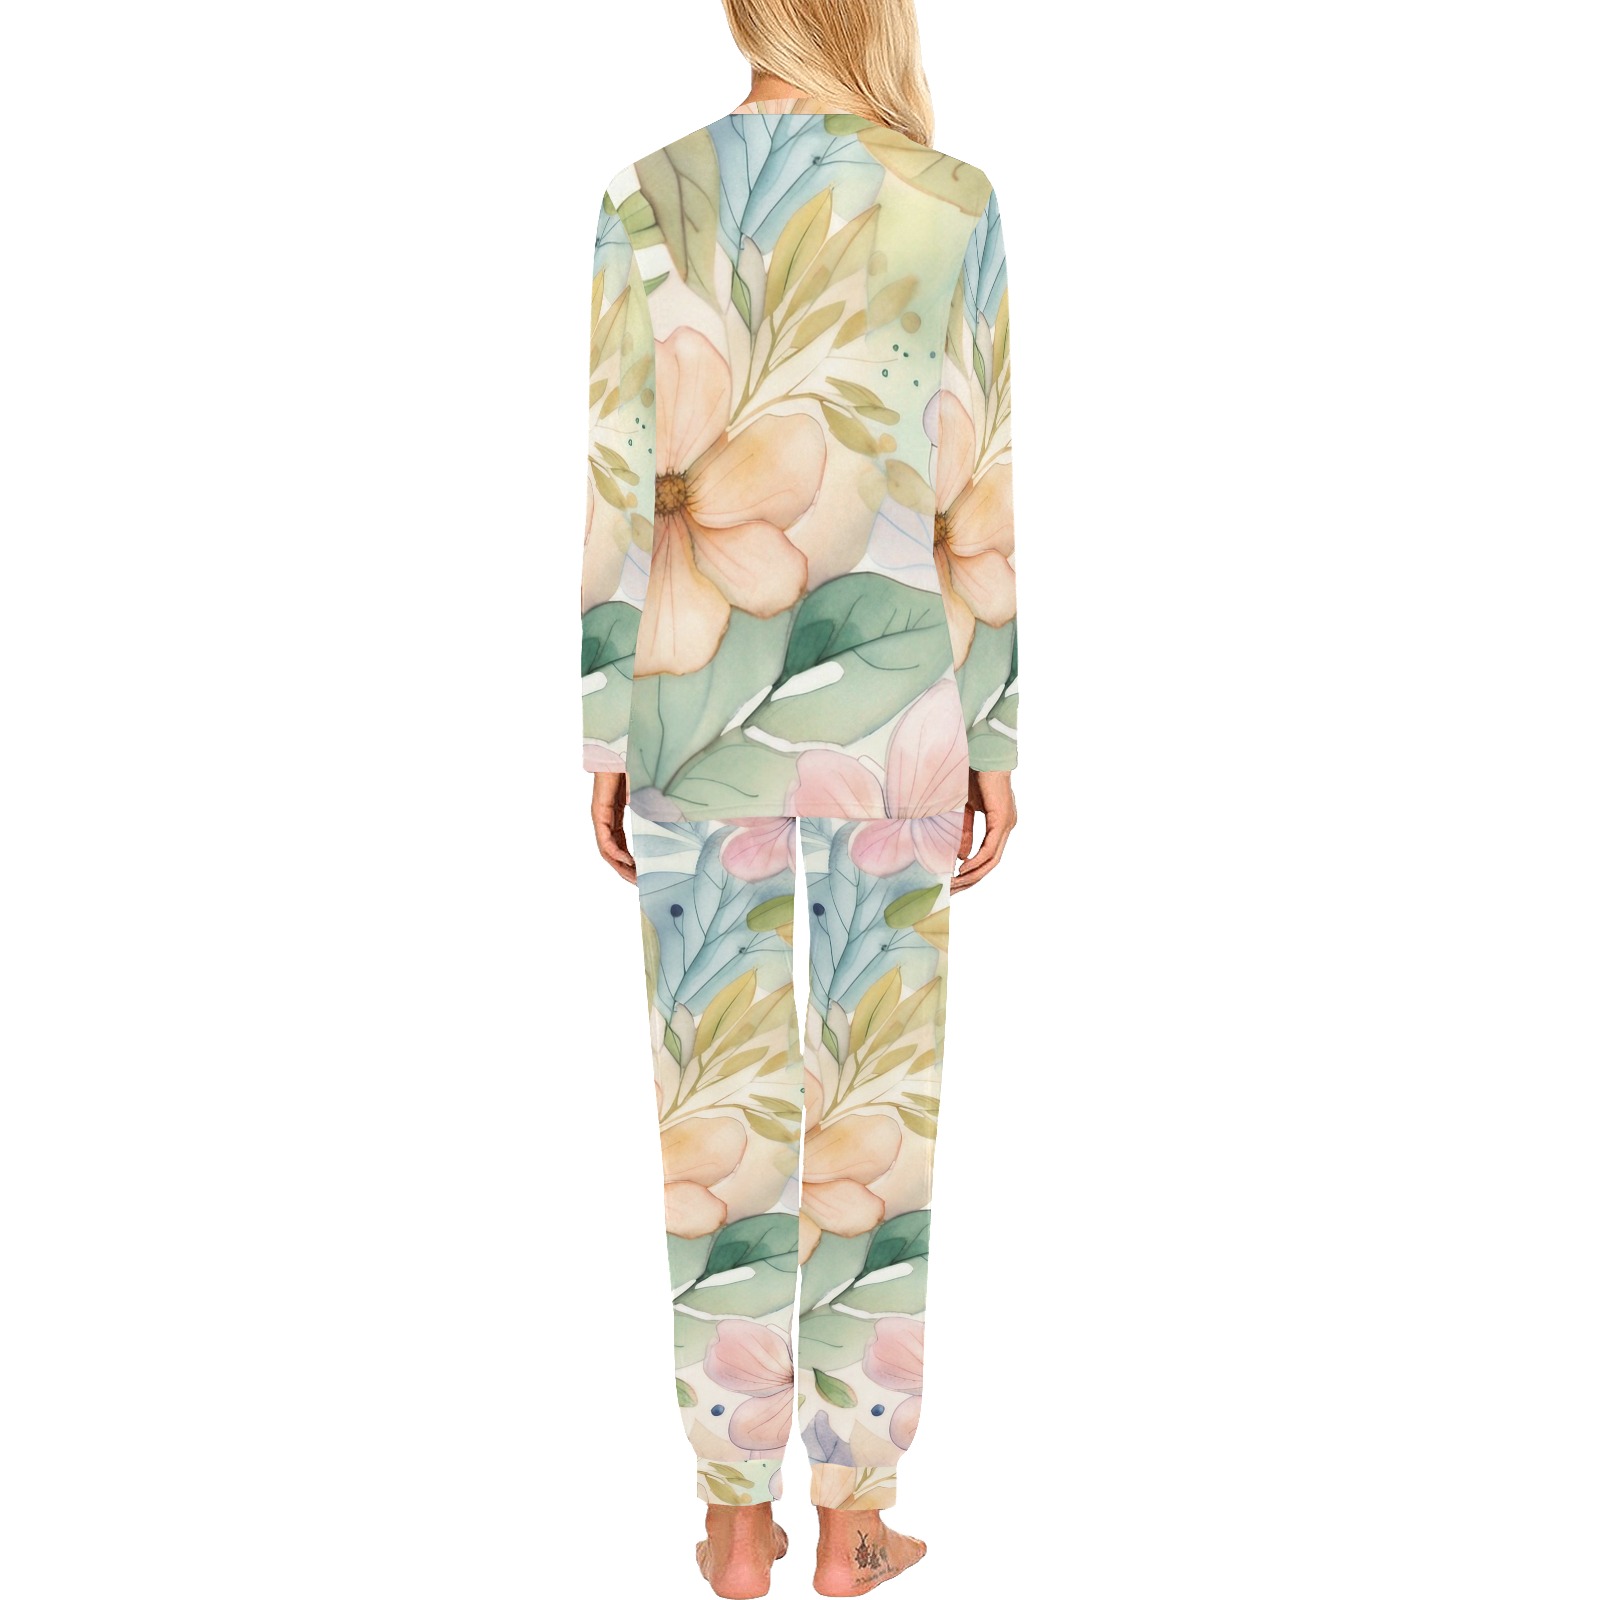 Watercolor Floral 1 Women's All Over Print Pajama Set